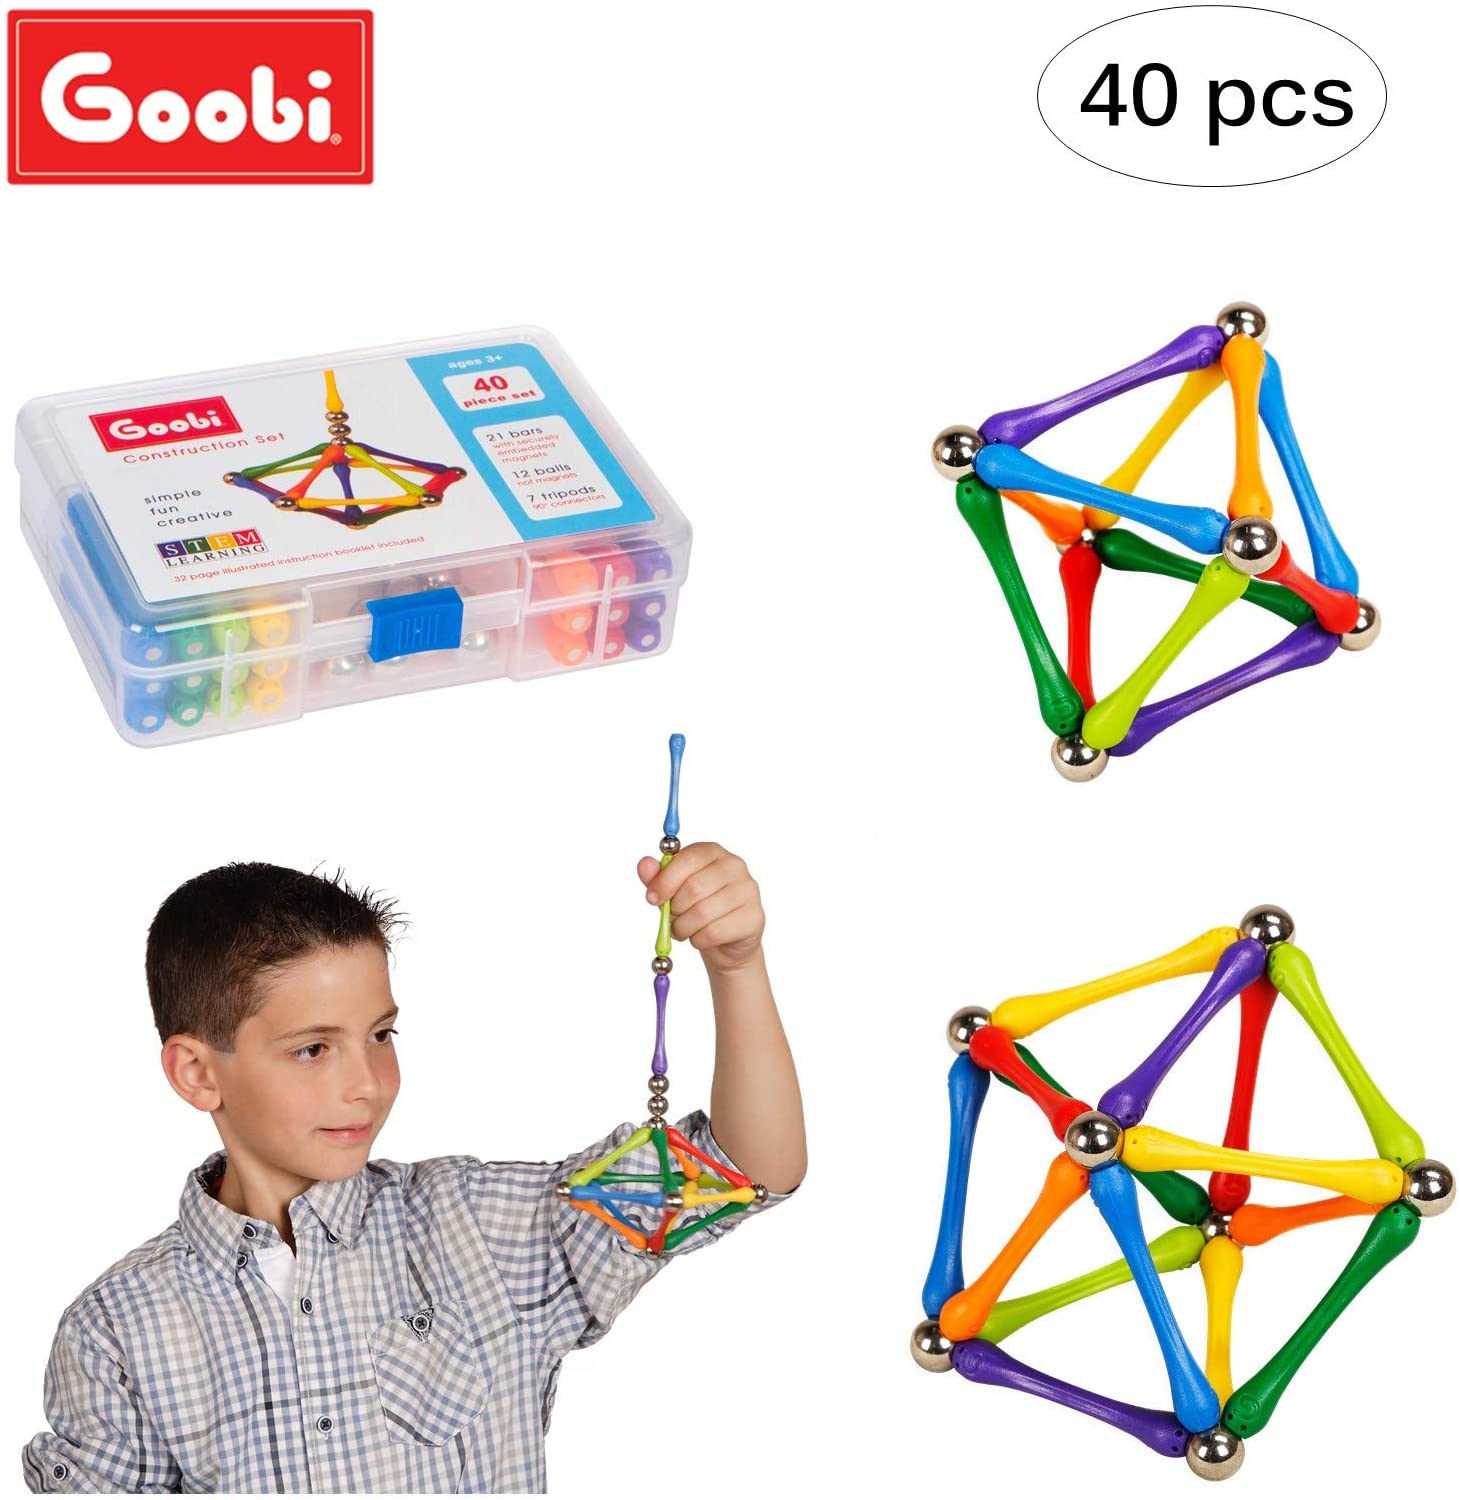 Goobi 40 Piece Construction Set Building Toy Active Play Sticks STEM Learning Creativity Imagination Children’s 3D Puzzle Educational Brain Toys for Kids Boys and Girls with Instruction Booklet